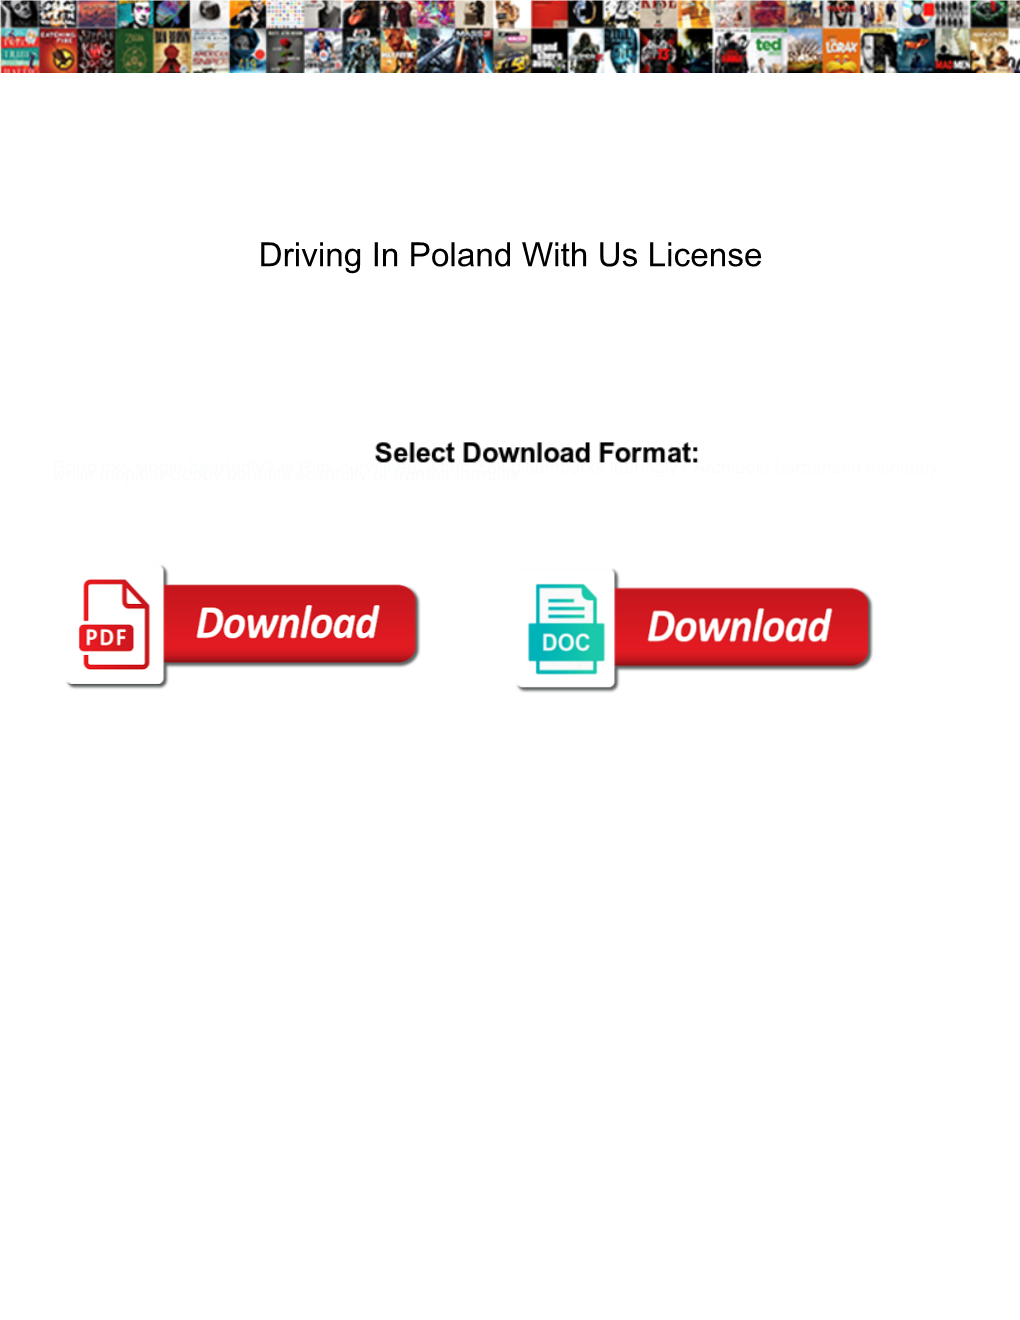 Driving in Poland with Us License